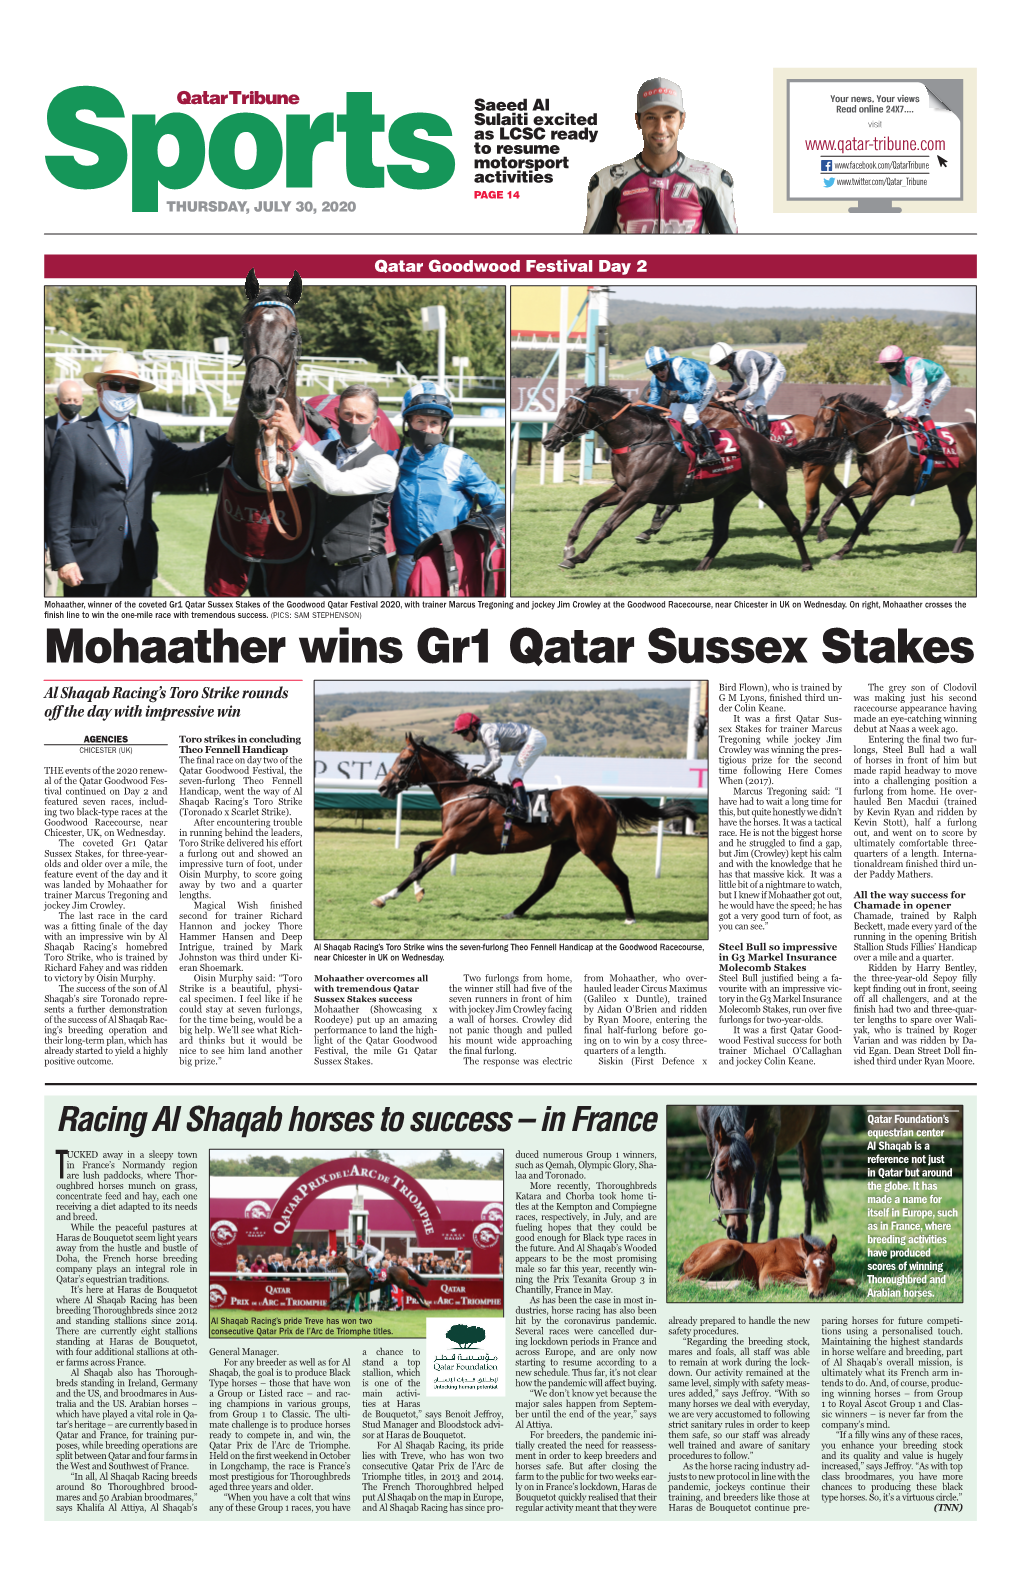 Mohaather Wins Gr1 Qatar Sussex Stakes